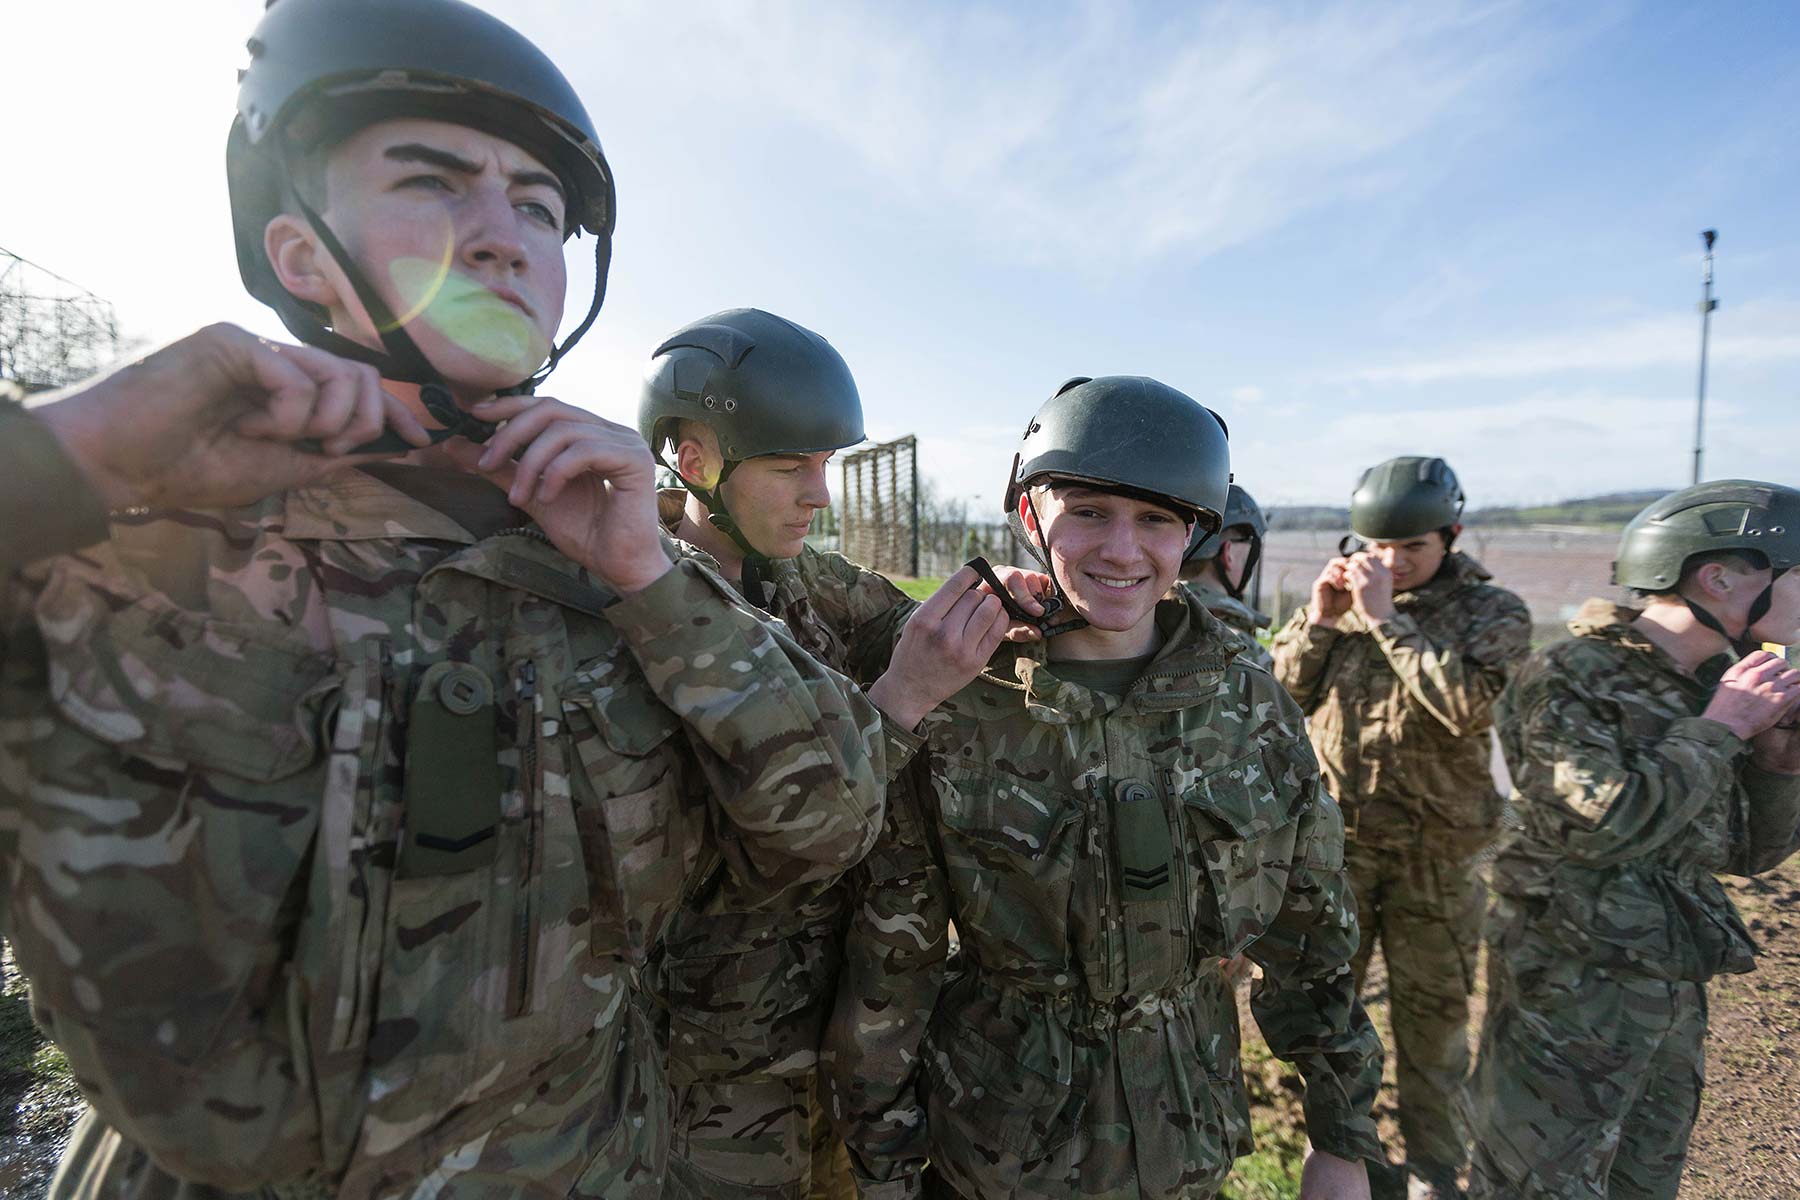 Royal Marines Sea Cadets in camouflage for an outdoor activity